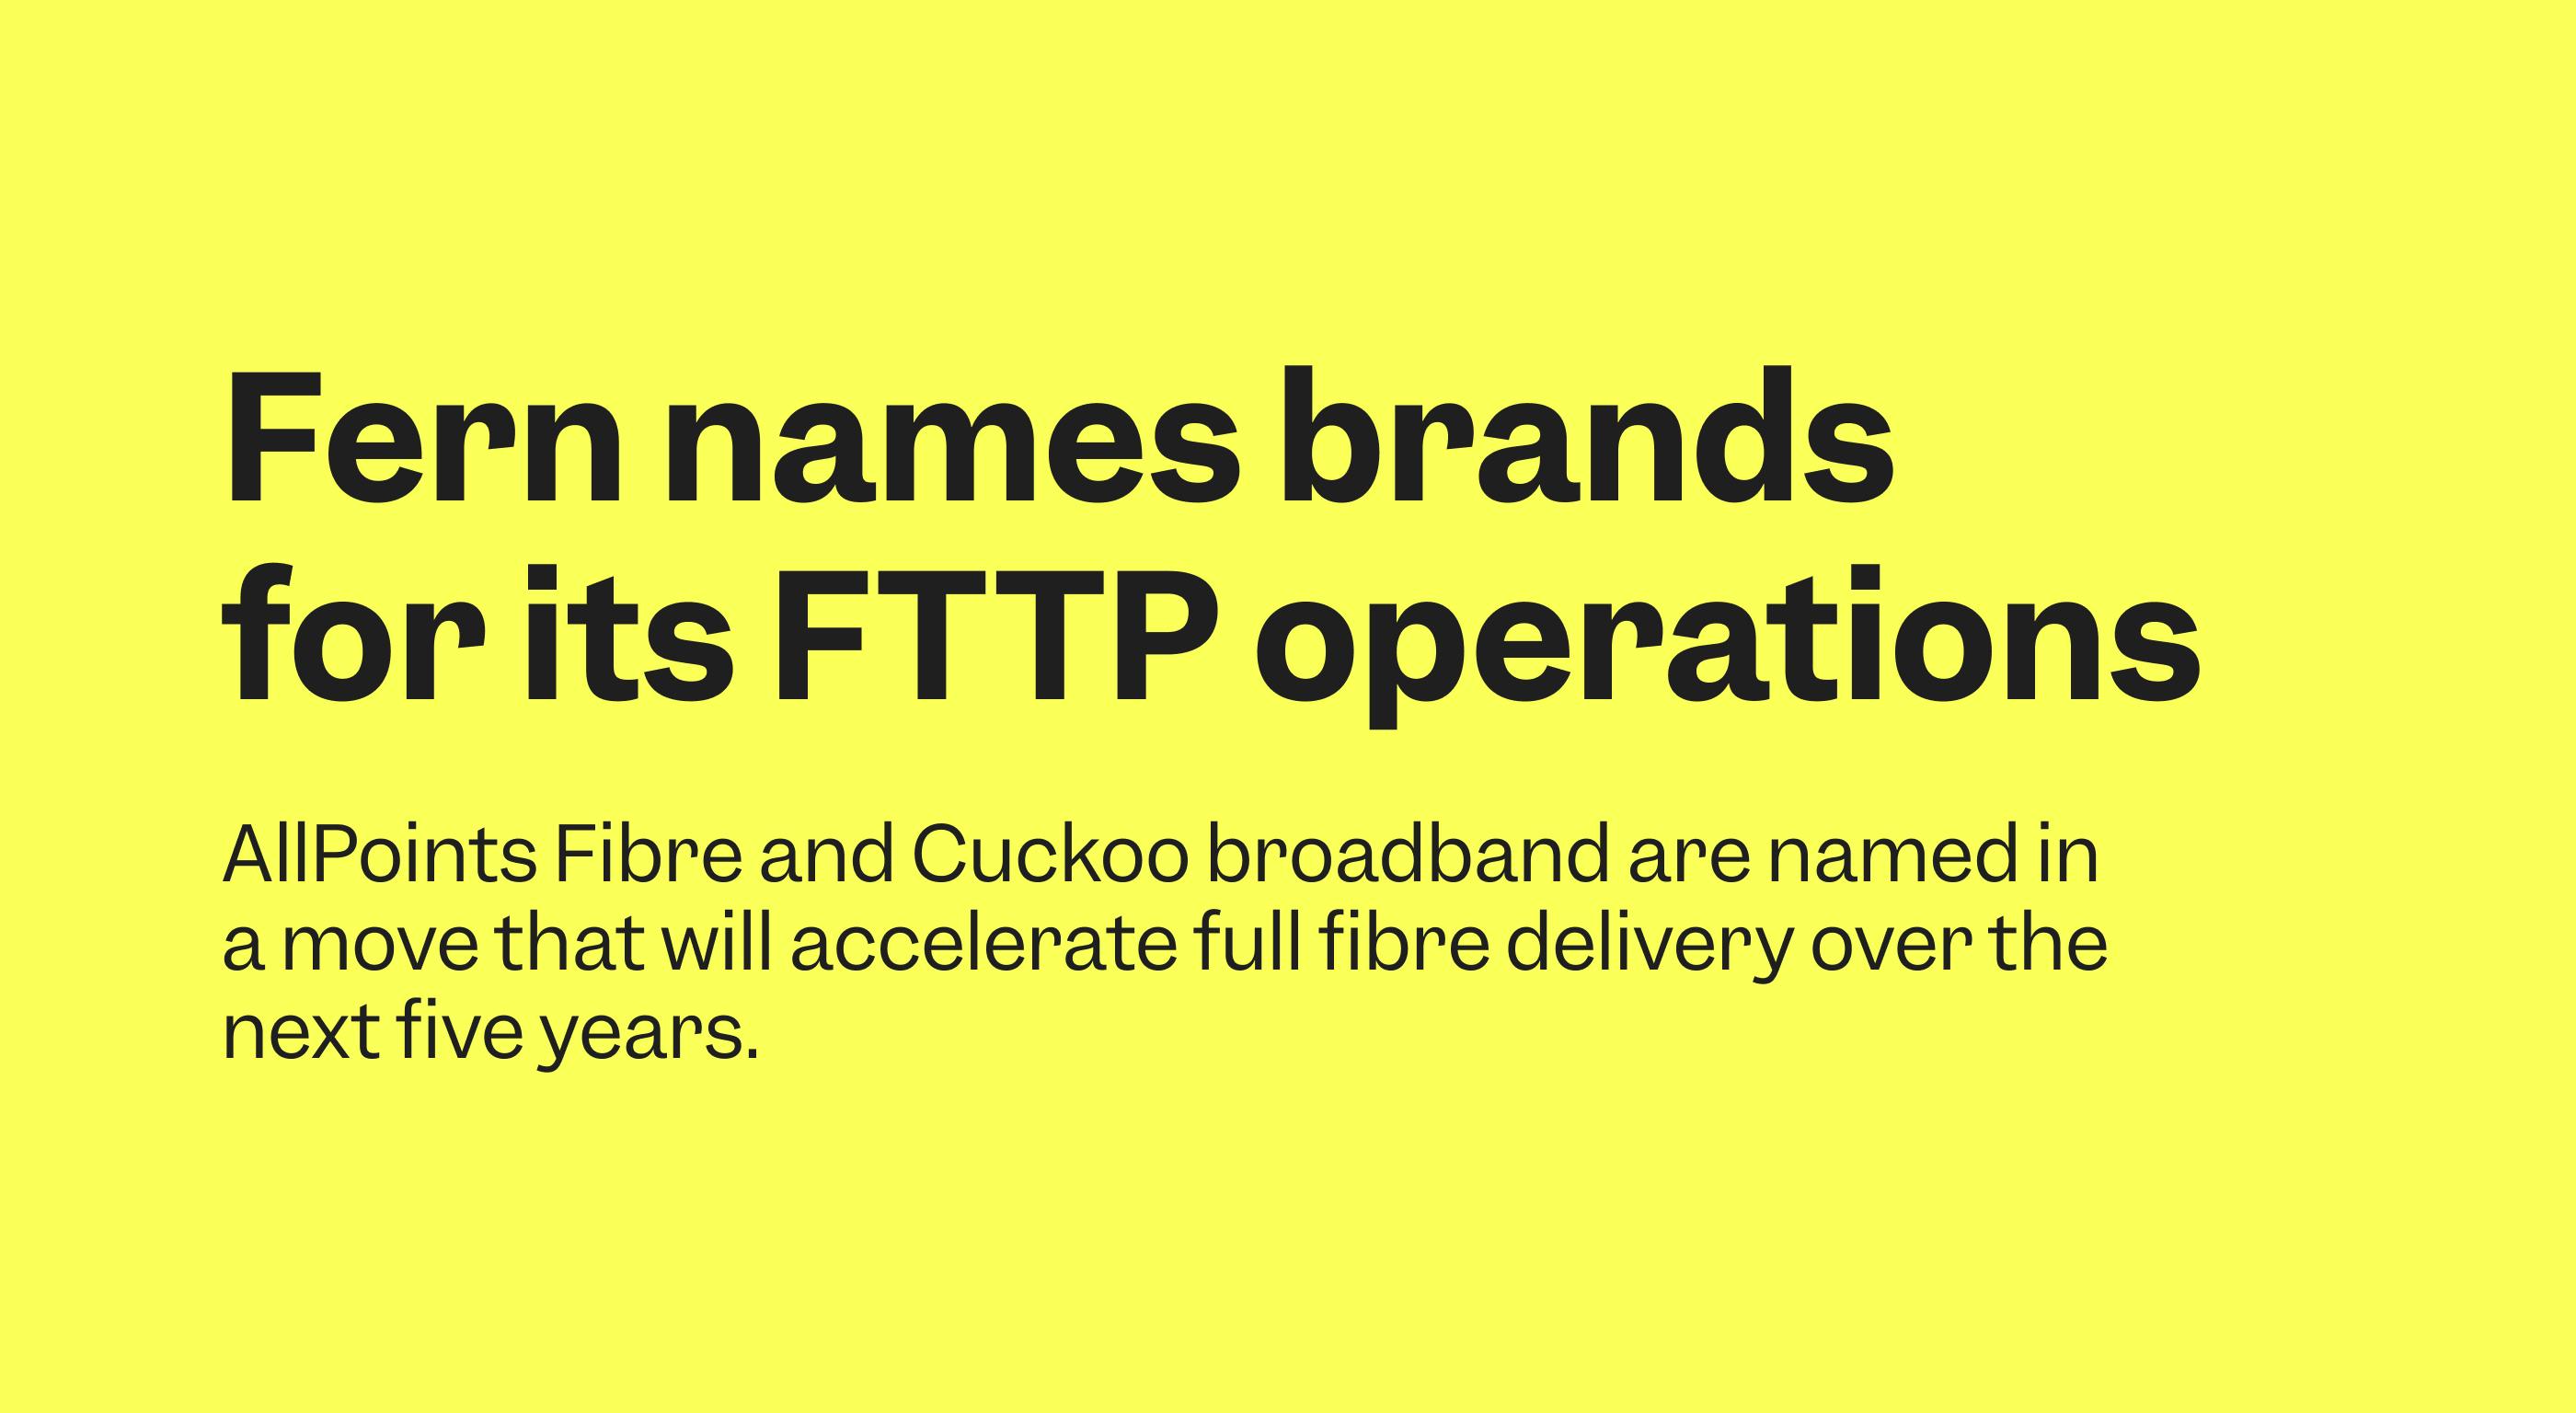 Fern names brands for its FTTP operations. AllPoints Fibre and Cuckoo broadband are named in a move that will accelerate full fibre delivery over the next five years.